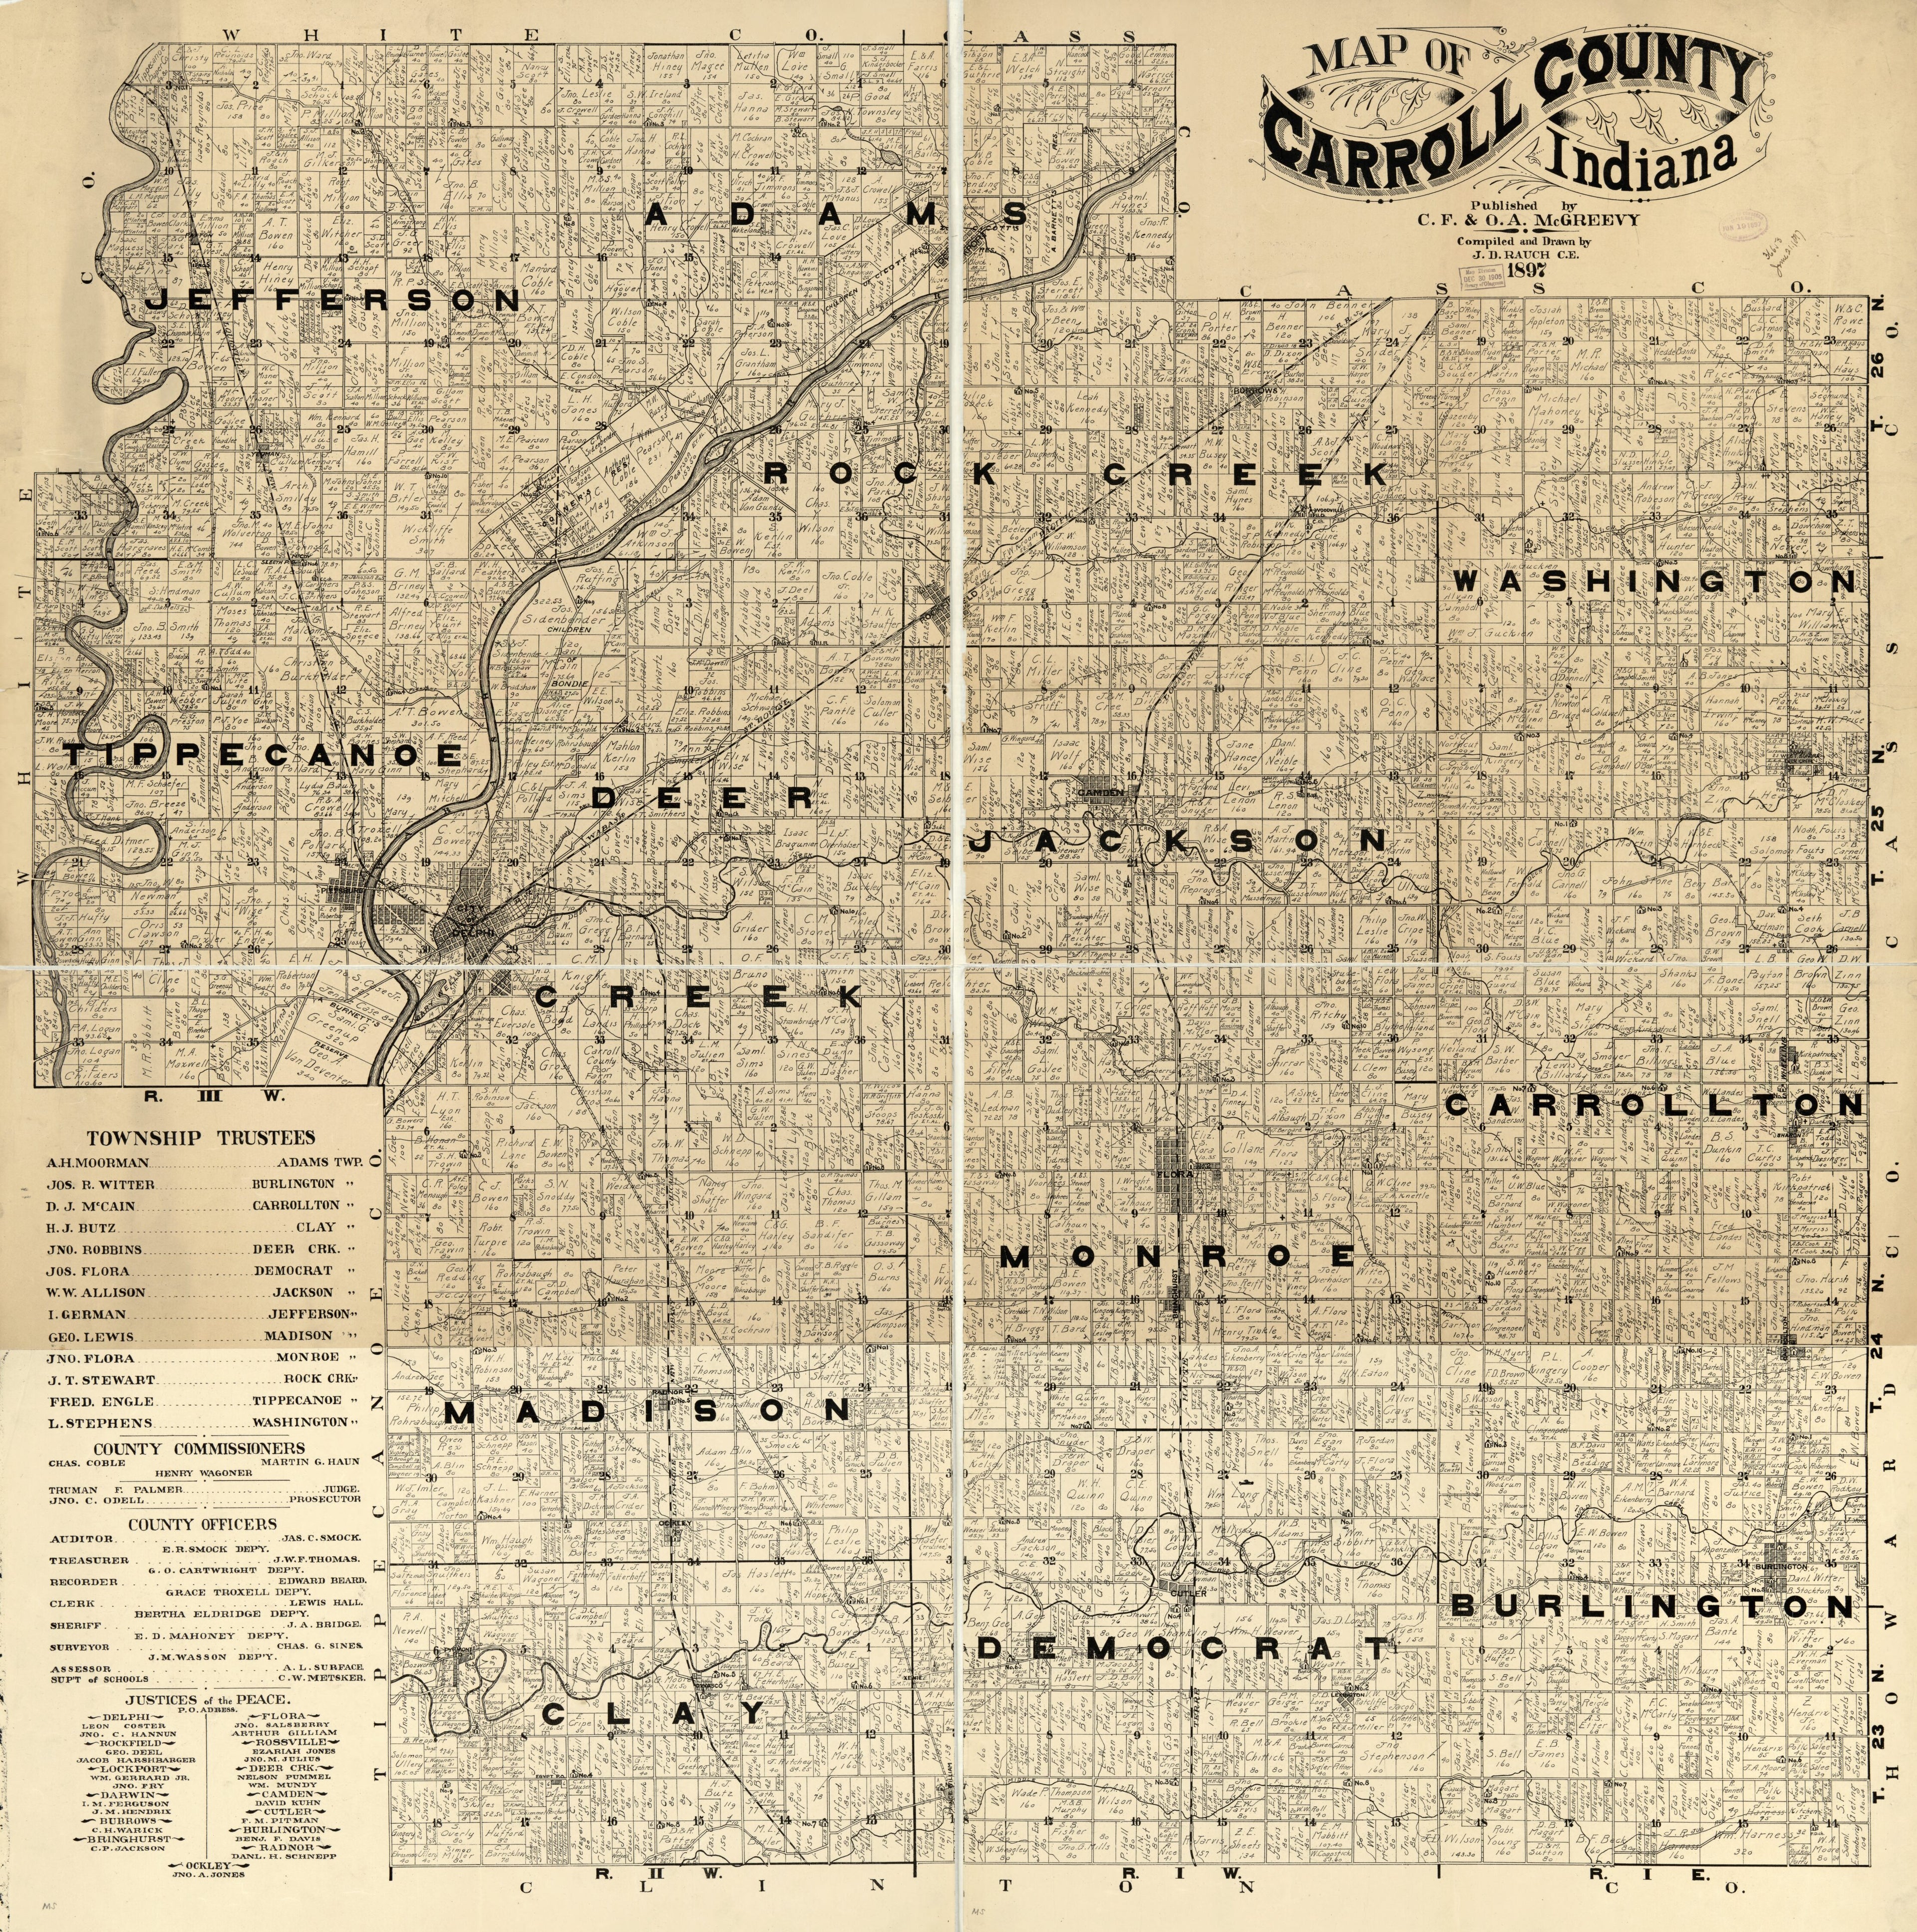 This old map of Map of Carroll County, Indiana from 1897 was created by J. D. Rauch in 1897